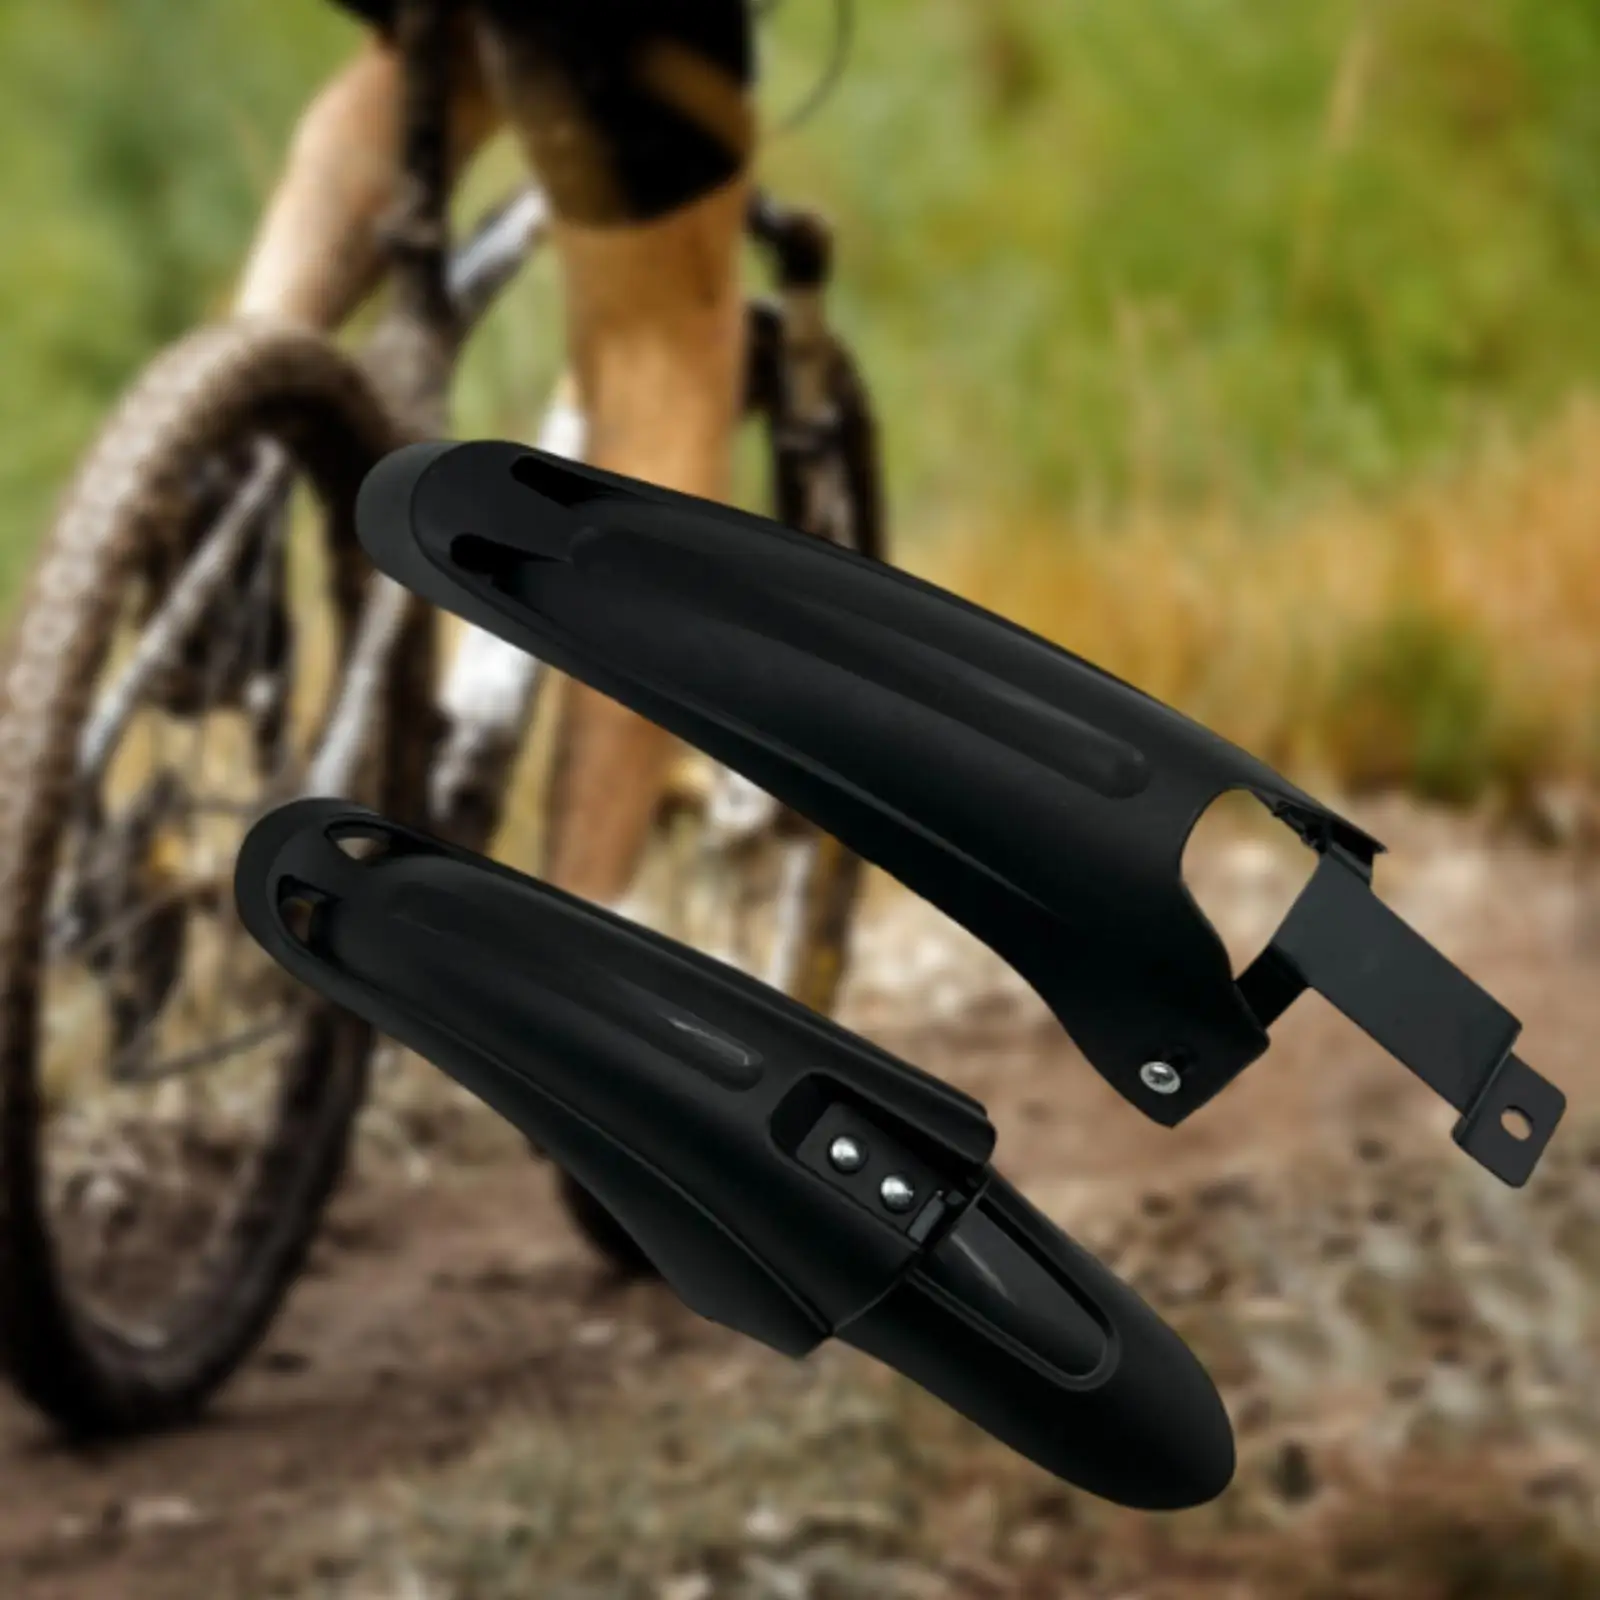 Bicycle Tire Mudguard Front and Rear for 20-26inch Mud Flaps Bike Fenders for BMX Road Bikes Mountain Bikes Cycling Riding